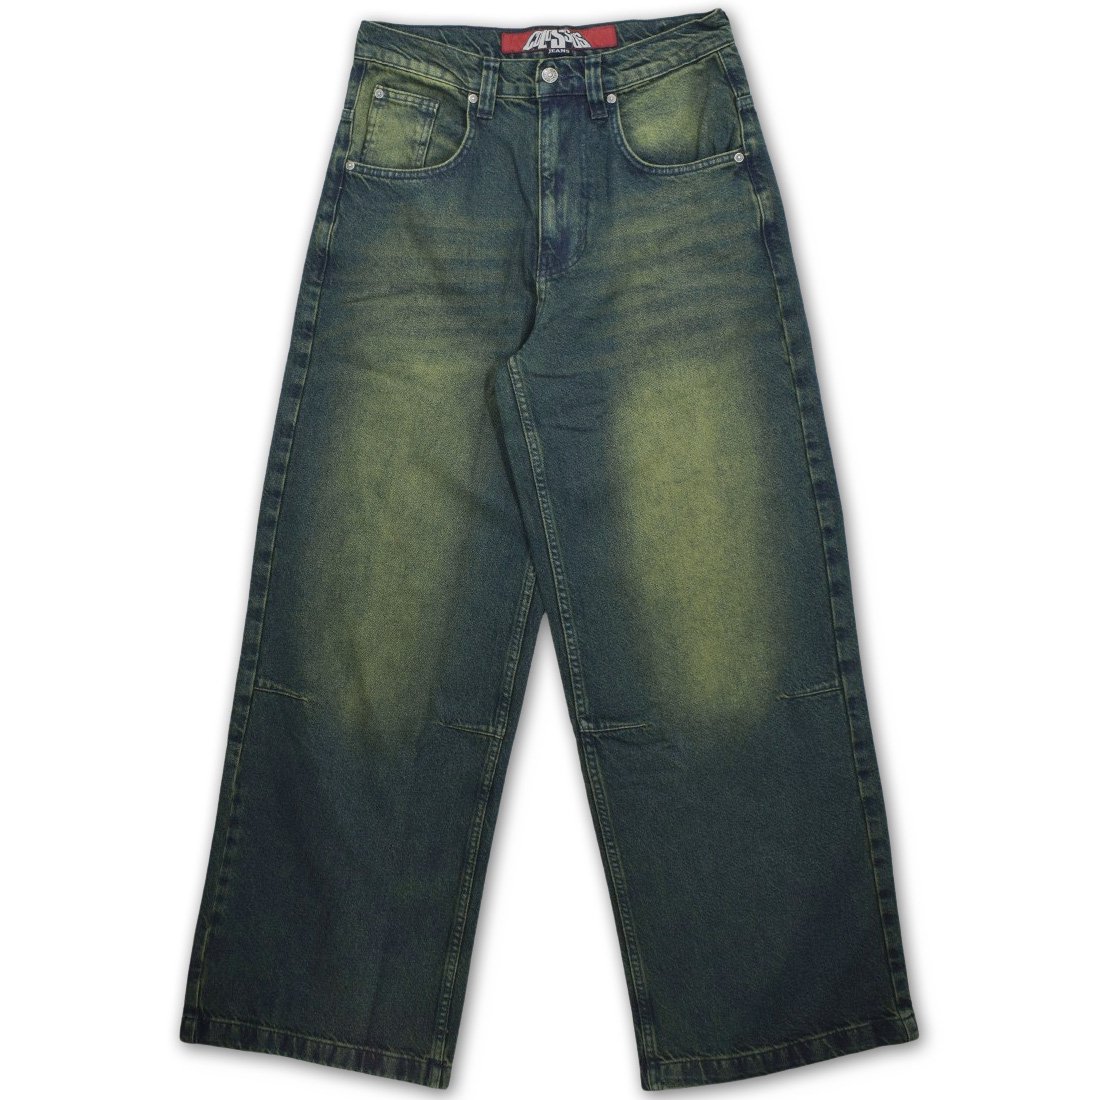 JADED LONDON/WB-COLOSSUS JEANS/30インチ